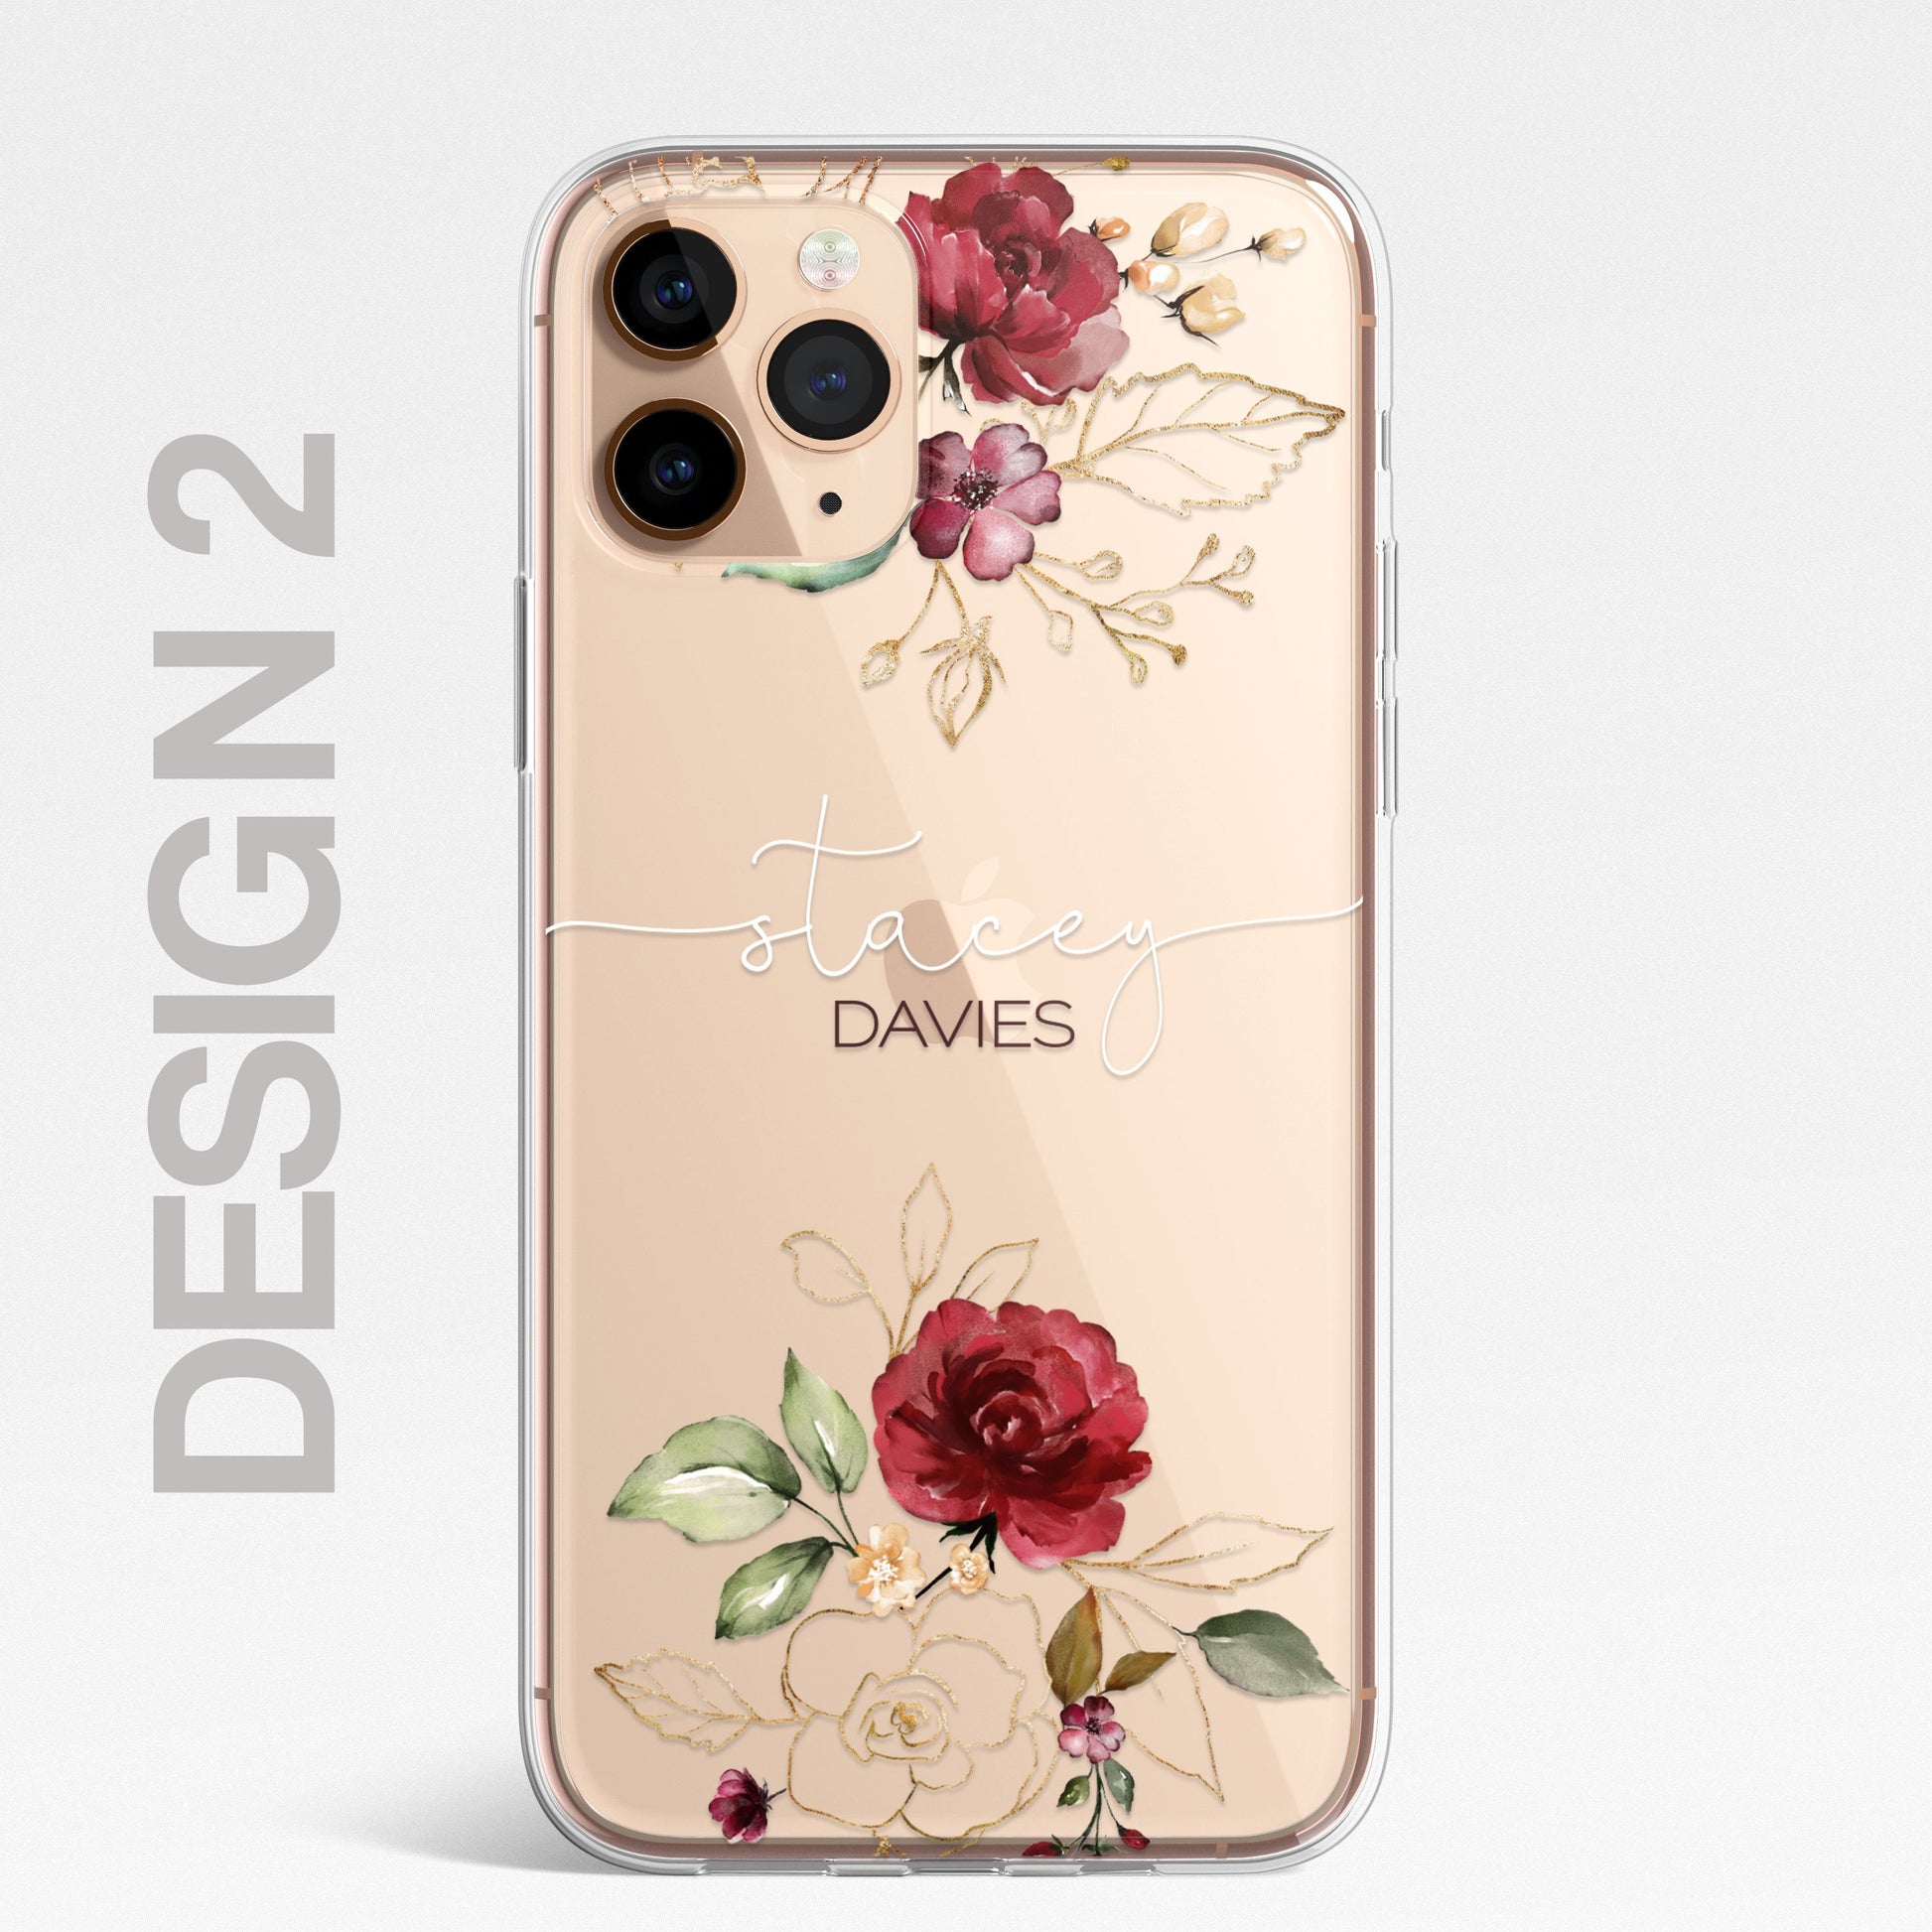 Floral Custom Phone Case Cover in CLEAR Silicone with Personalised Initials Name RED Floral Flower Design for iPhone & Samsung Galaxy